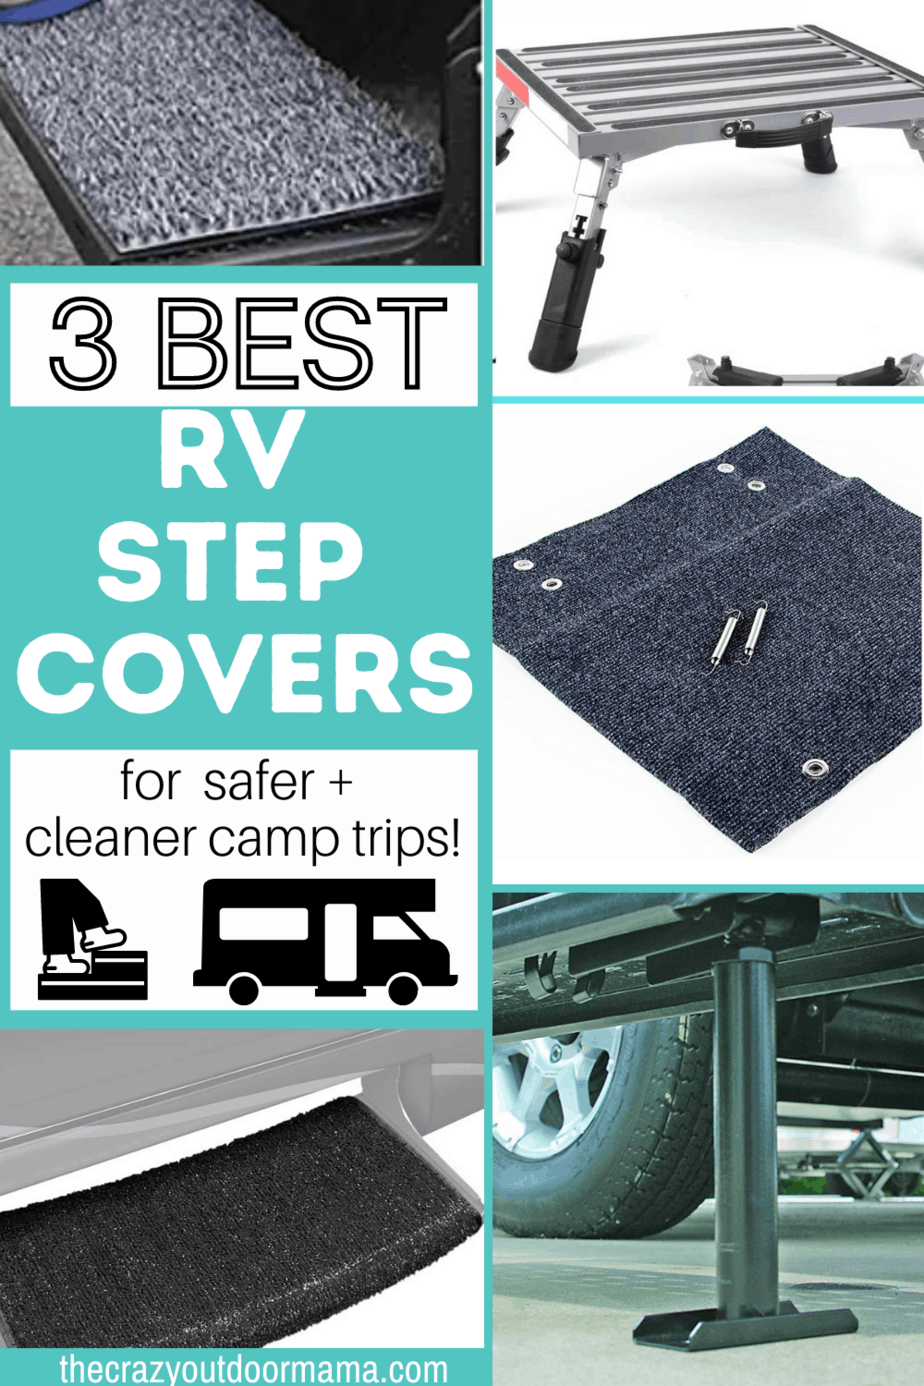 https://www.thecrazyoutdoormama.com/wp-content/uploads/2021/03/rv-step-covers.png